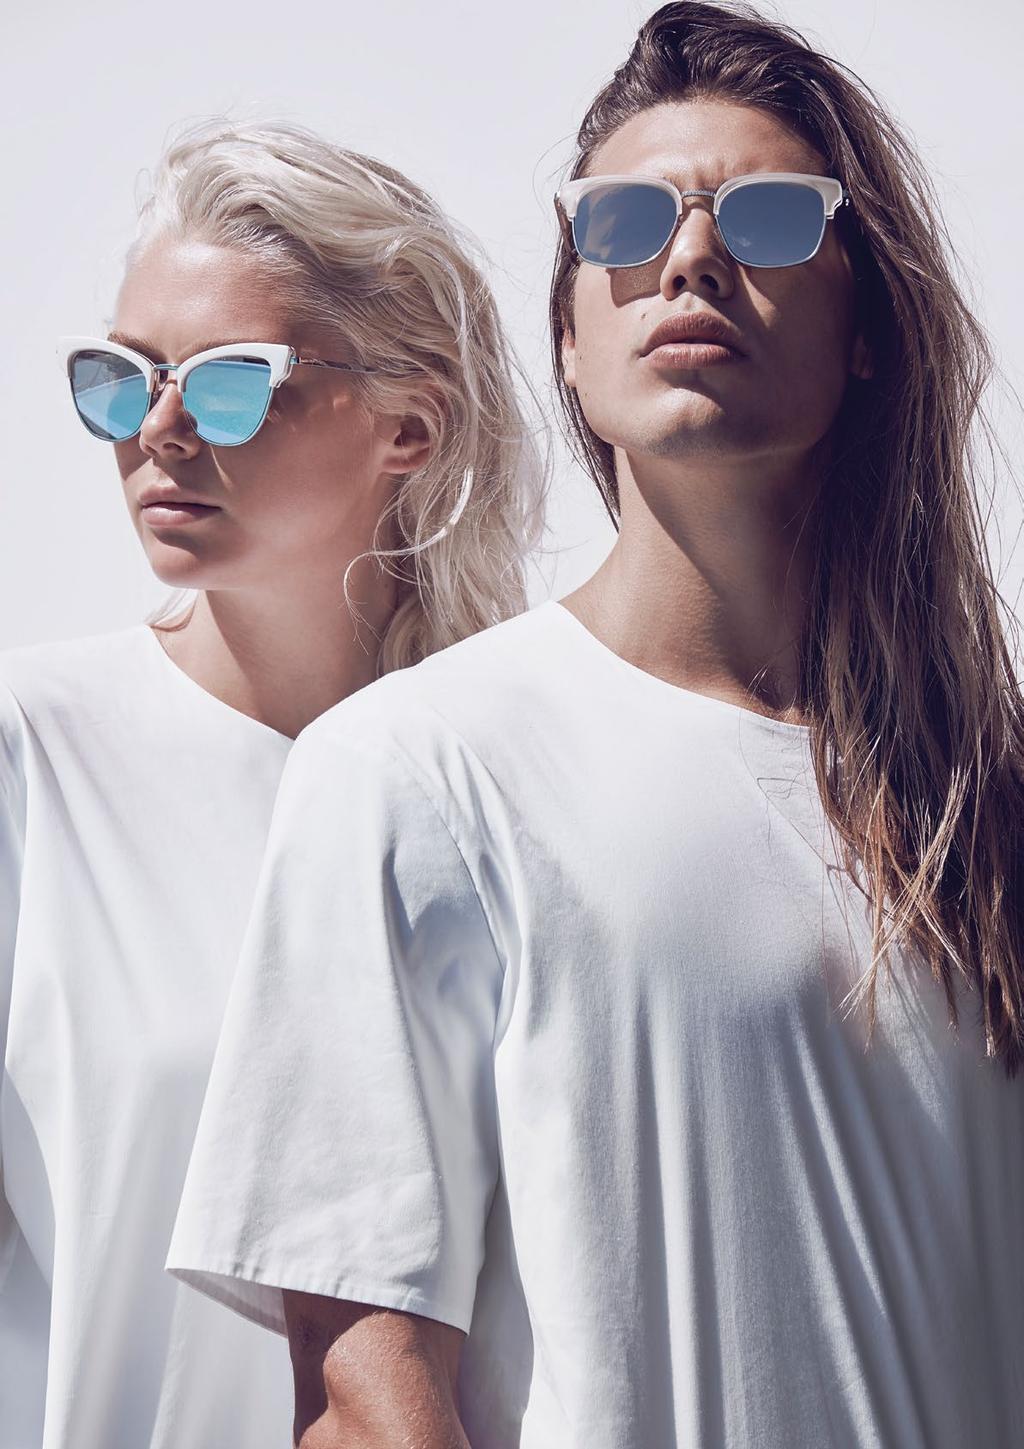 Setting the seasons trends, Seafolly offers a fun, fashion forward and innovative range eyewear, comprising bold statement colour, contrasting textures and hardware to